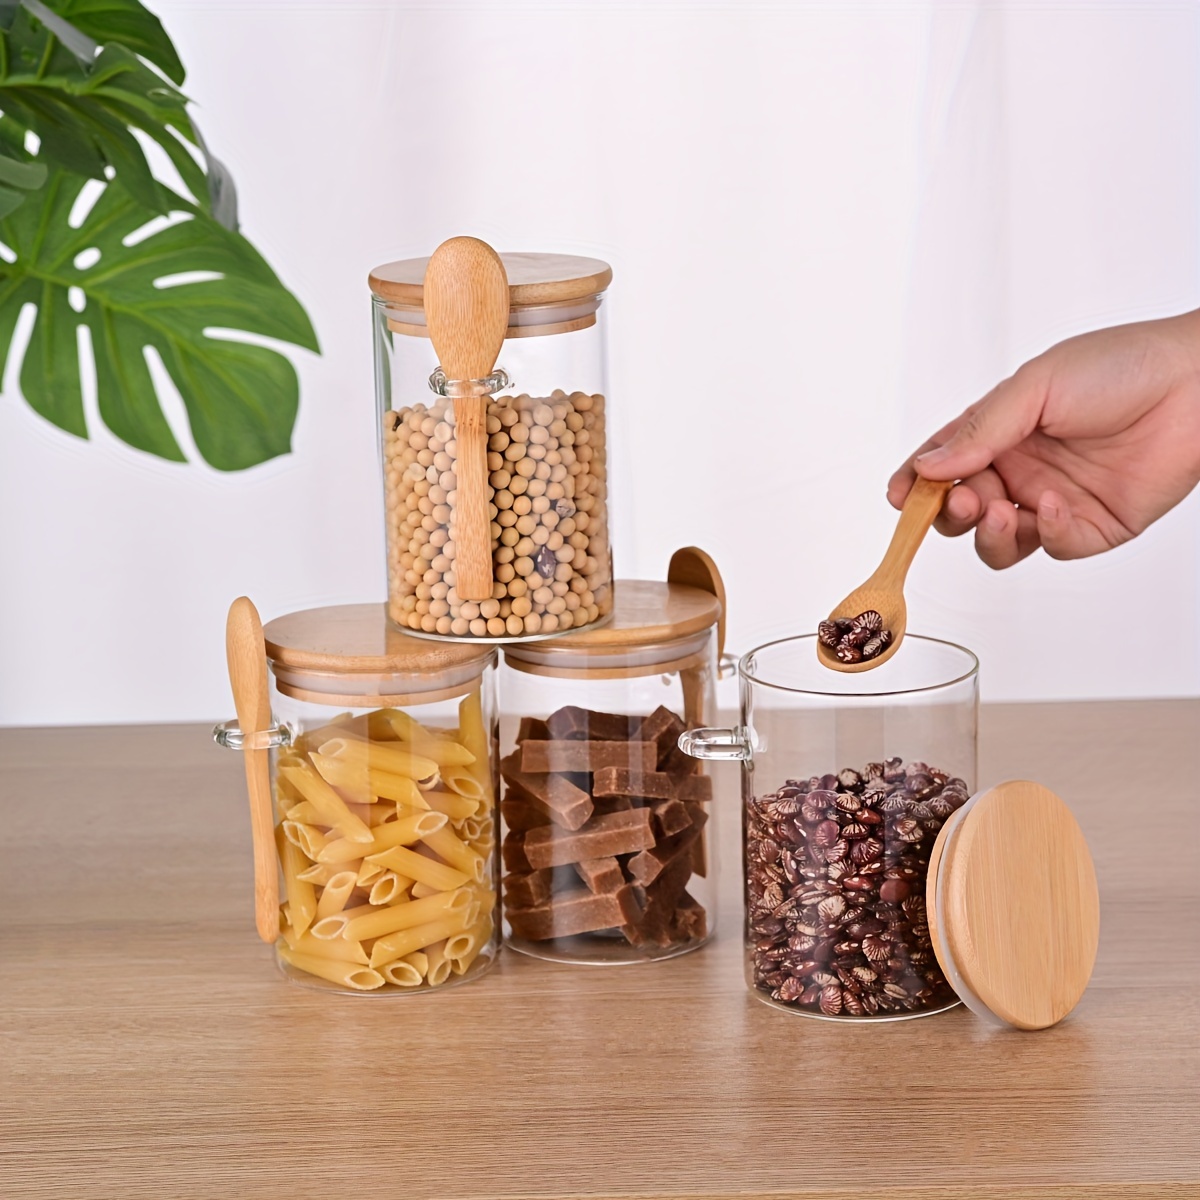 6-piece Glass Food Storage Container Set with Wood Lids